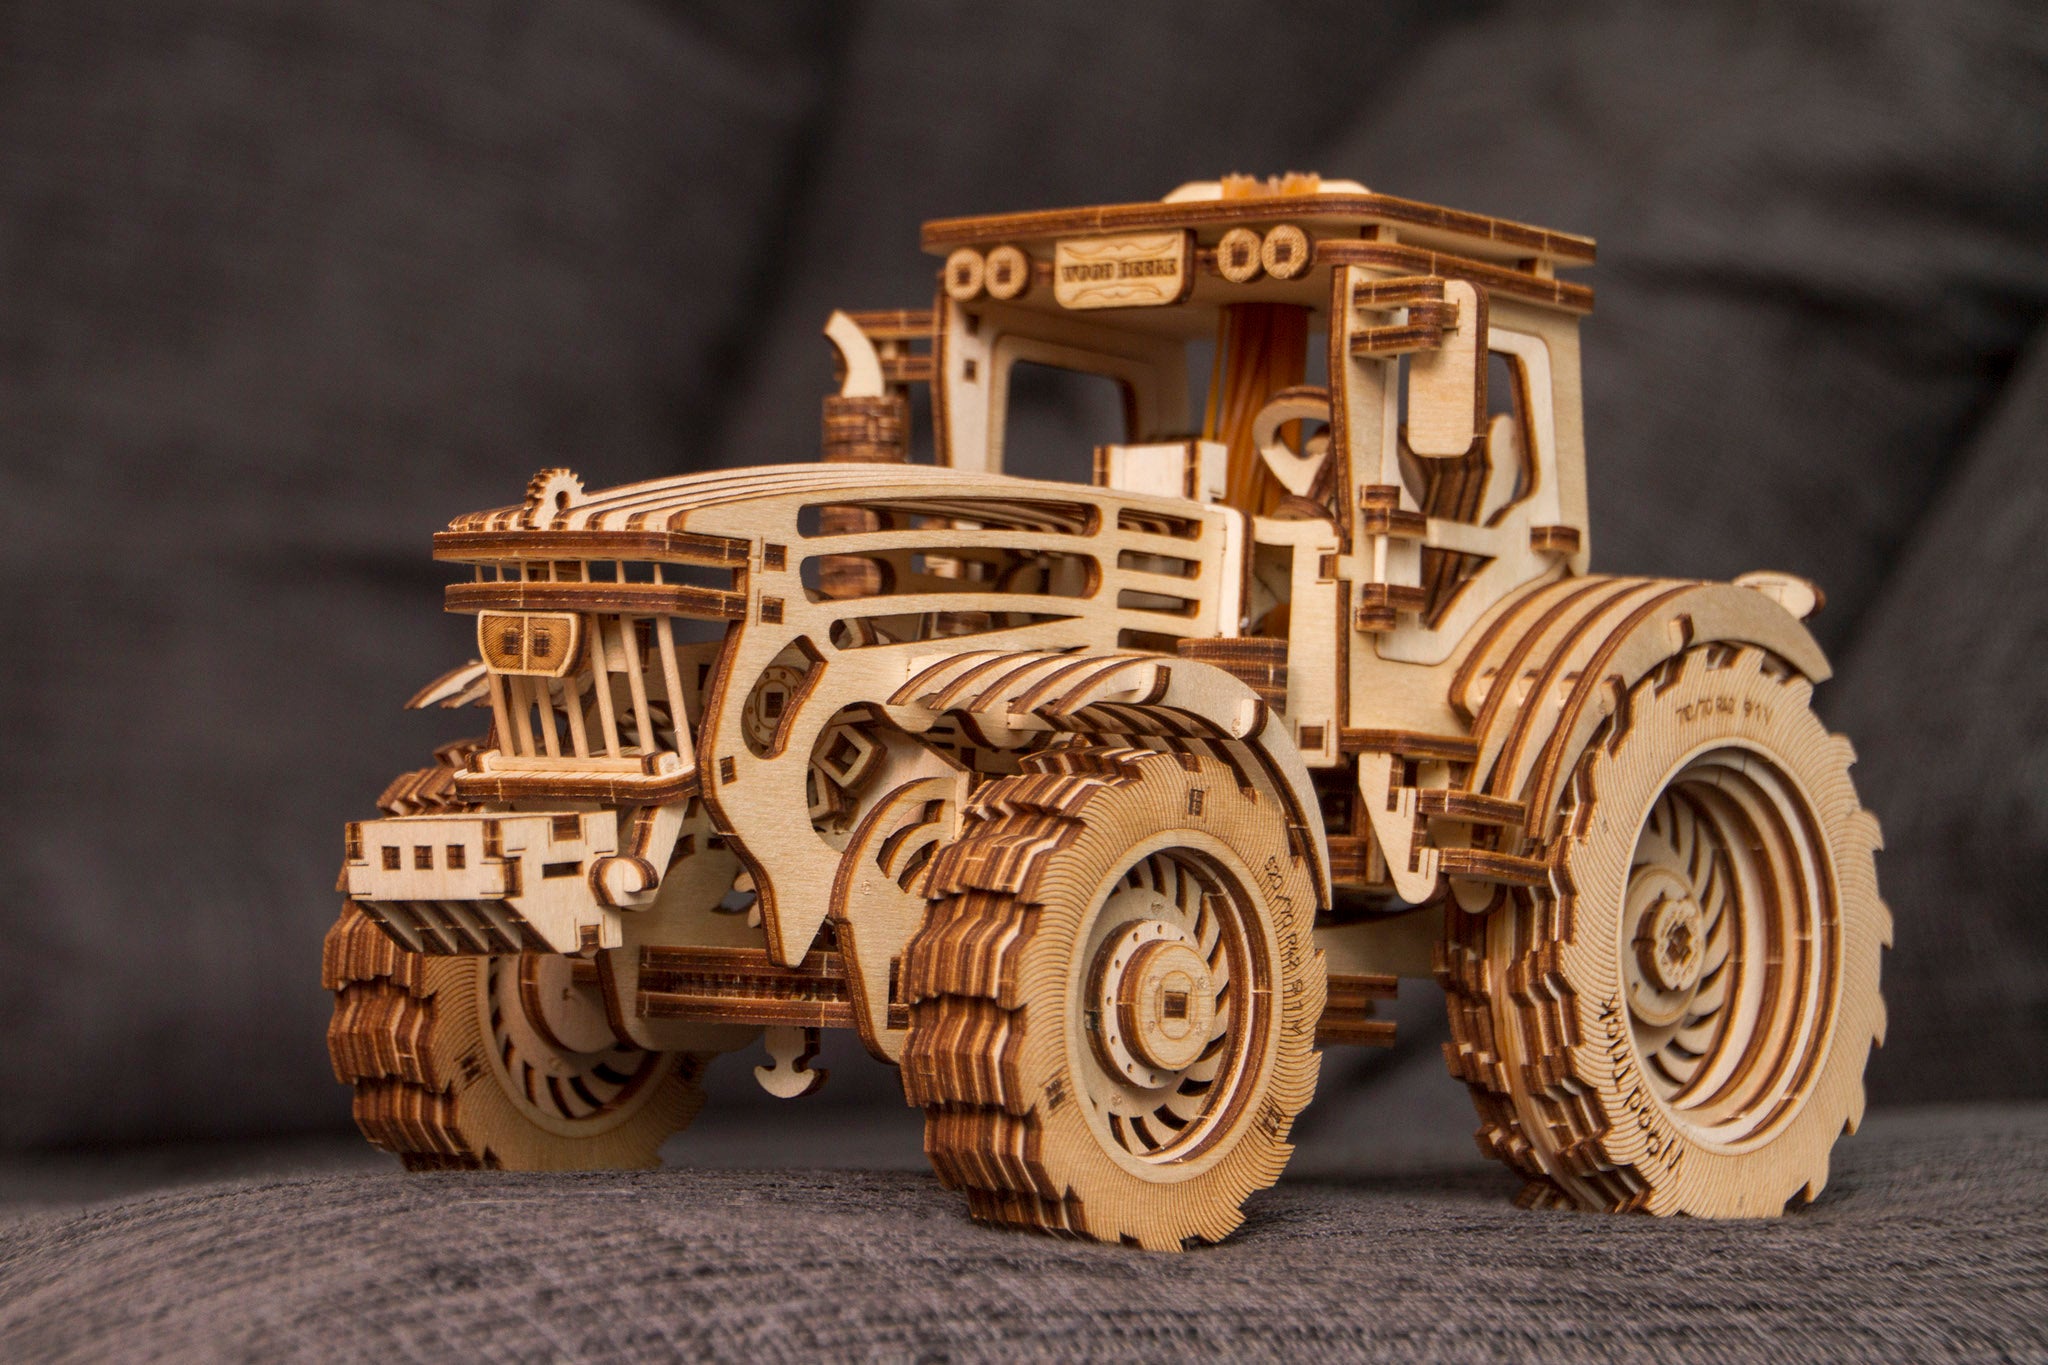 Tractor can't disappoint you. Awesome 3d wooden mechanical model.